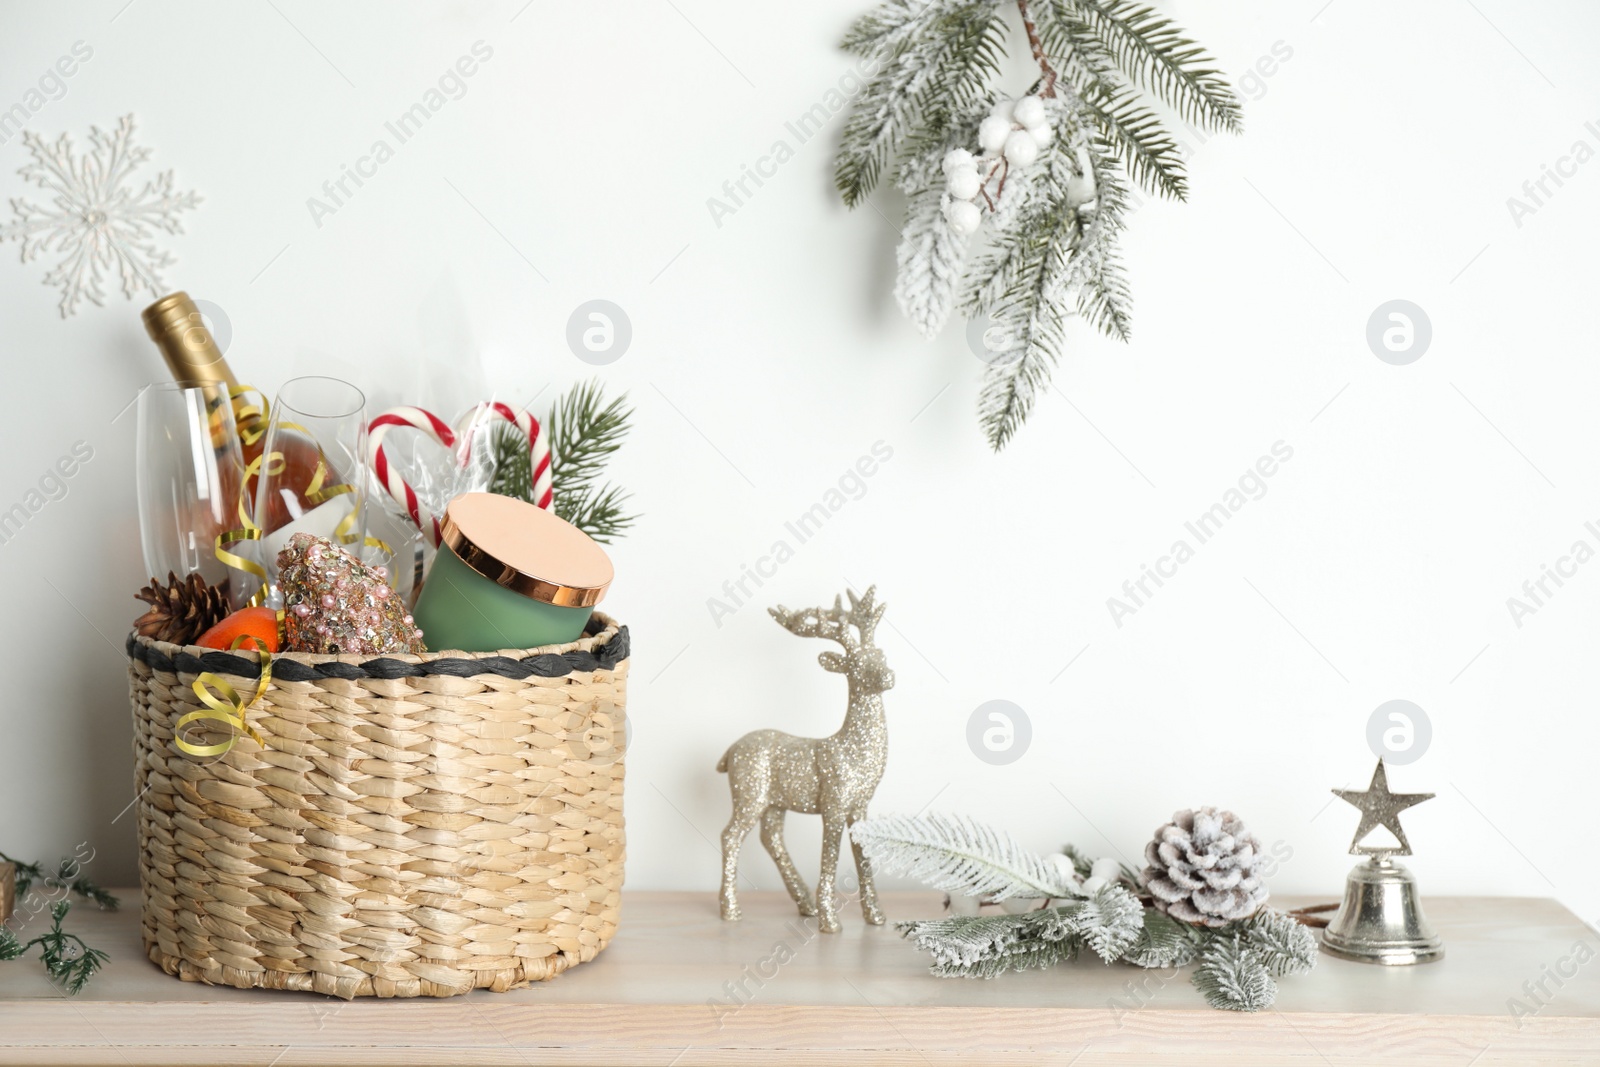 Photo of Wicker basket with gift set and Christmas decor on wooden table